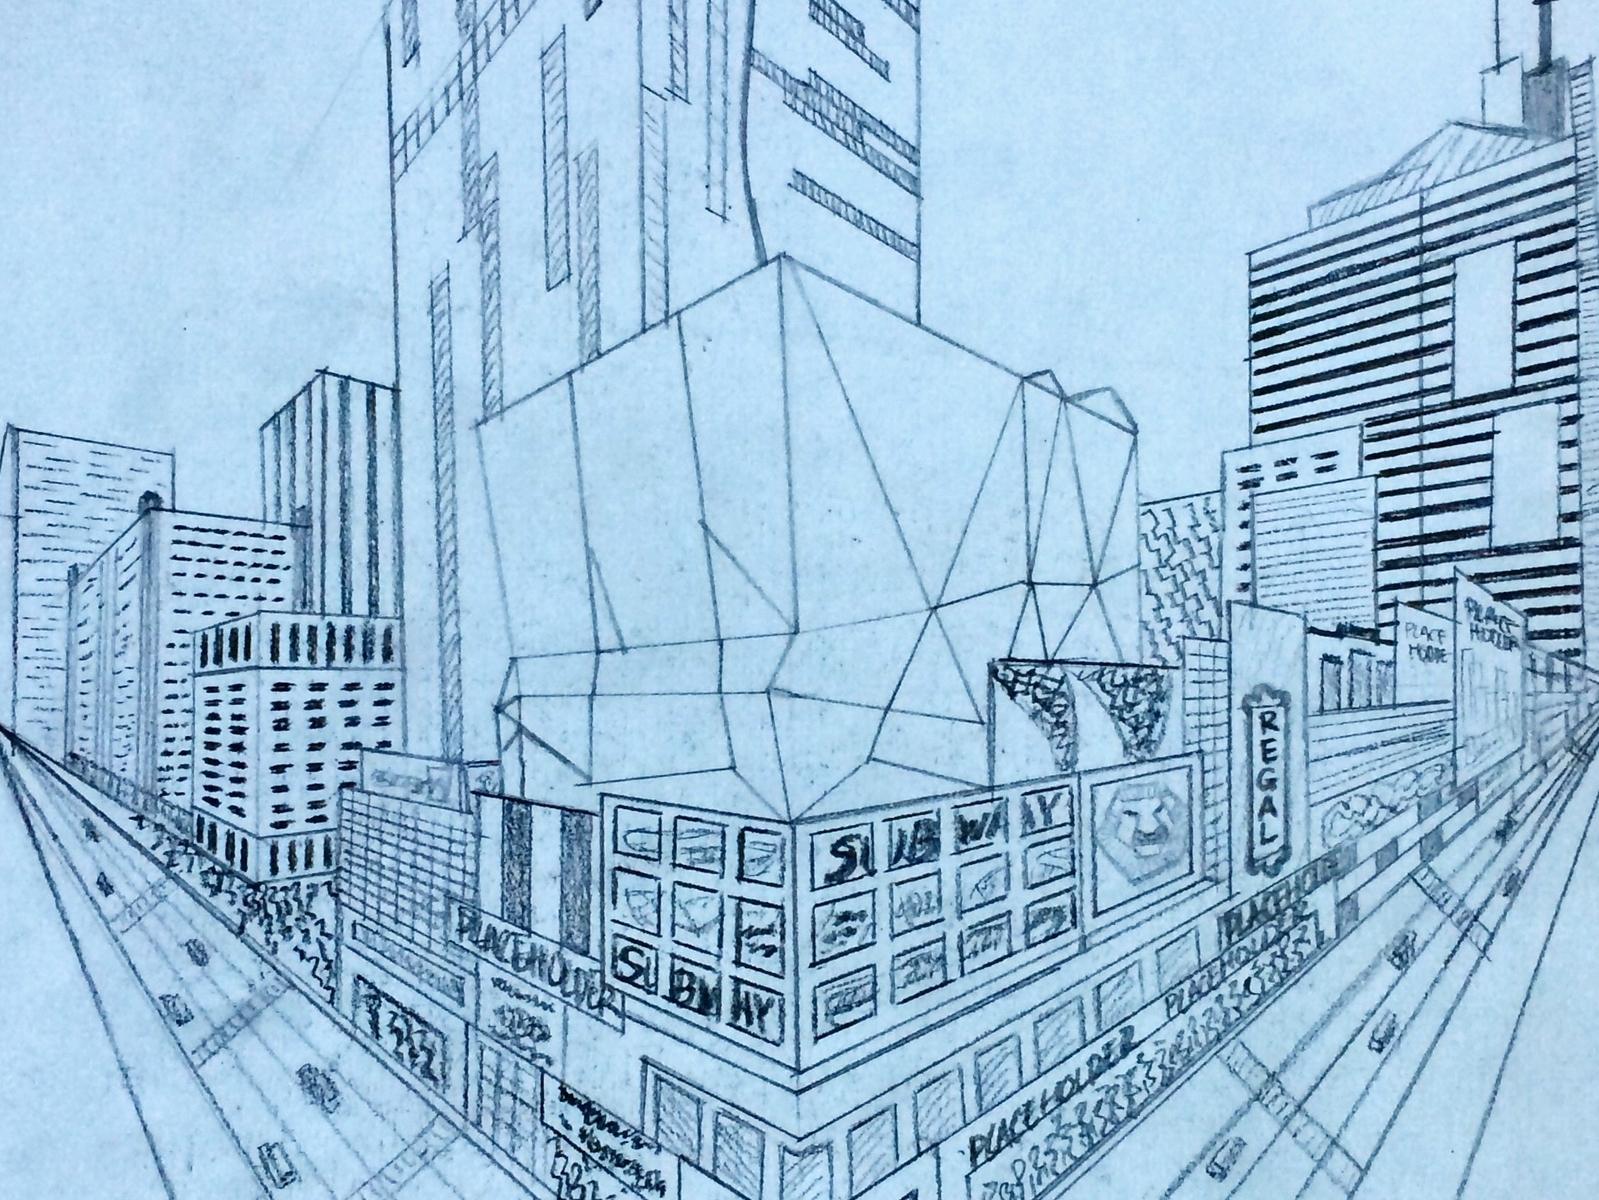 How to draw buildings like an architect in 2point or 3point perspective